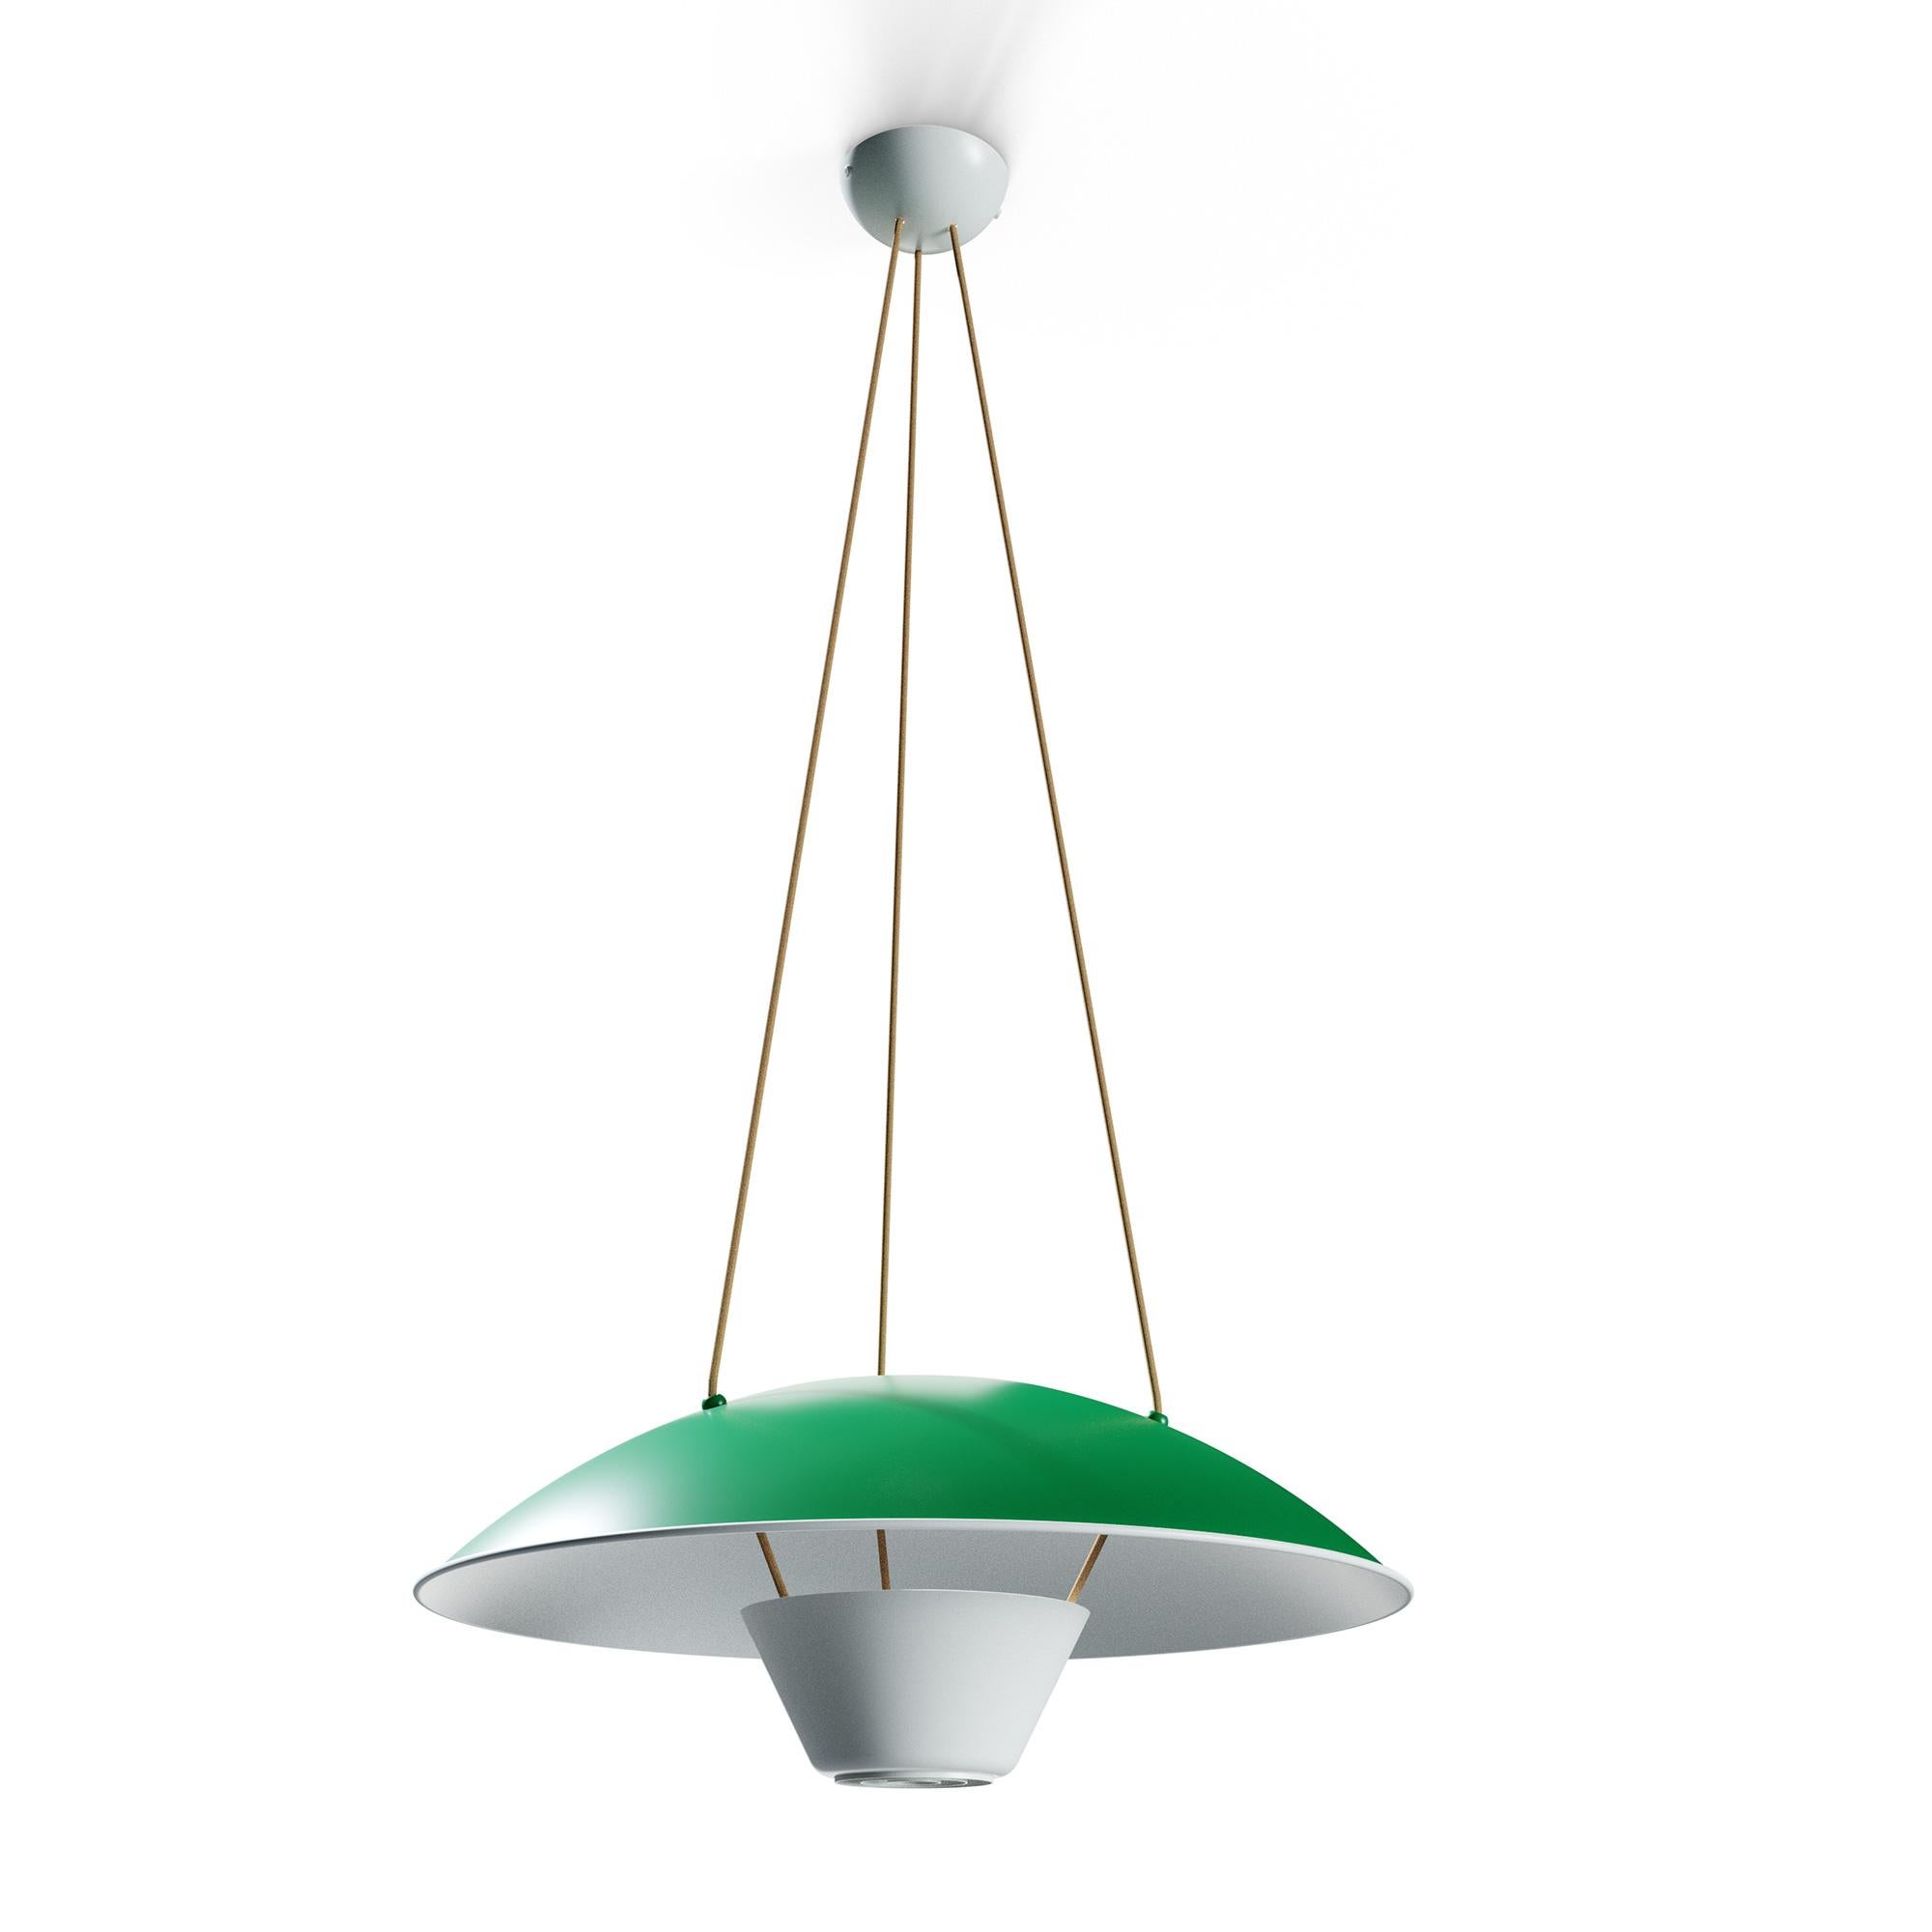 Michel Mortier M4 suspension lamp in green for Disderot. Originally designed in 1952, this sculptural lamp is a newly produced numbered edition with authentication certificate made in France by Disderot with many of the same small-scale